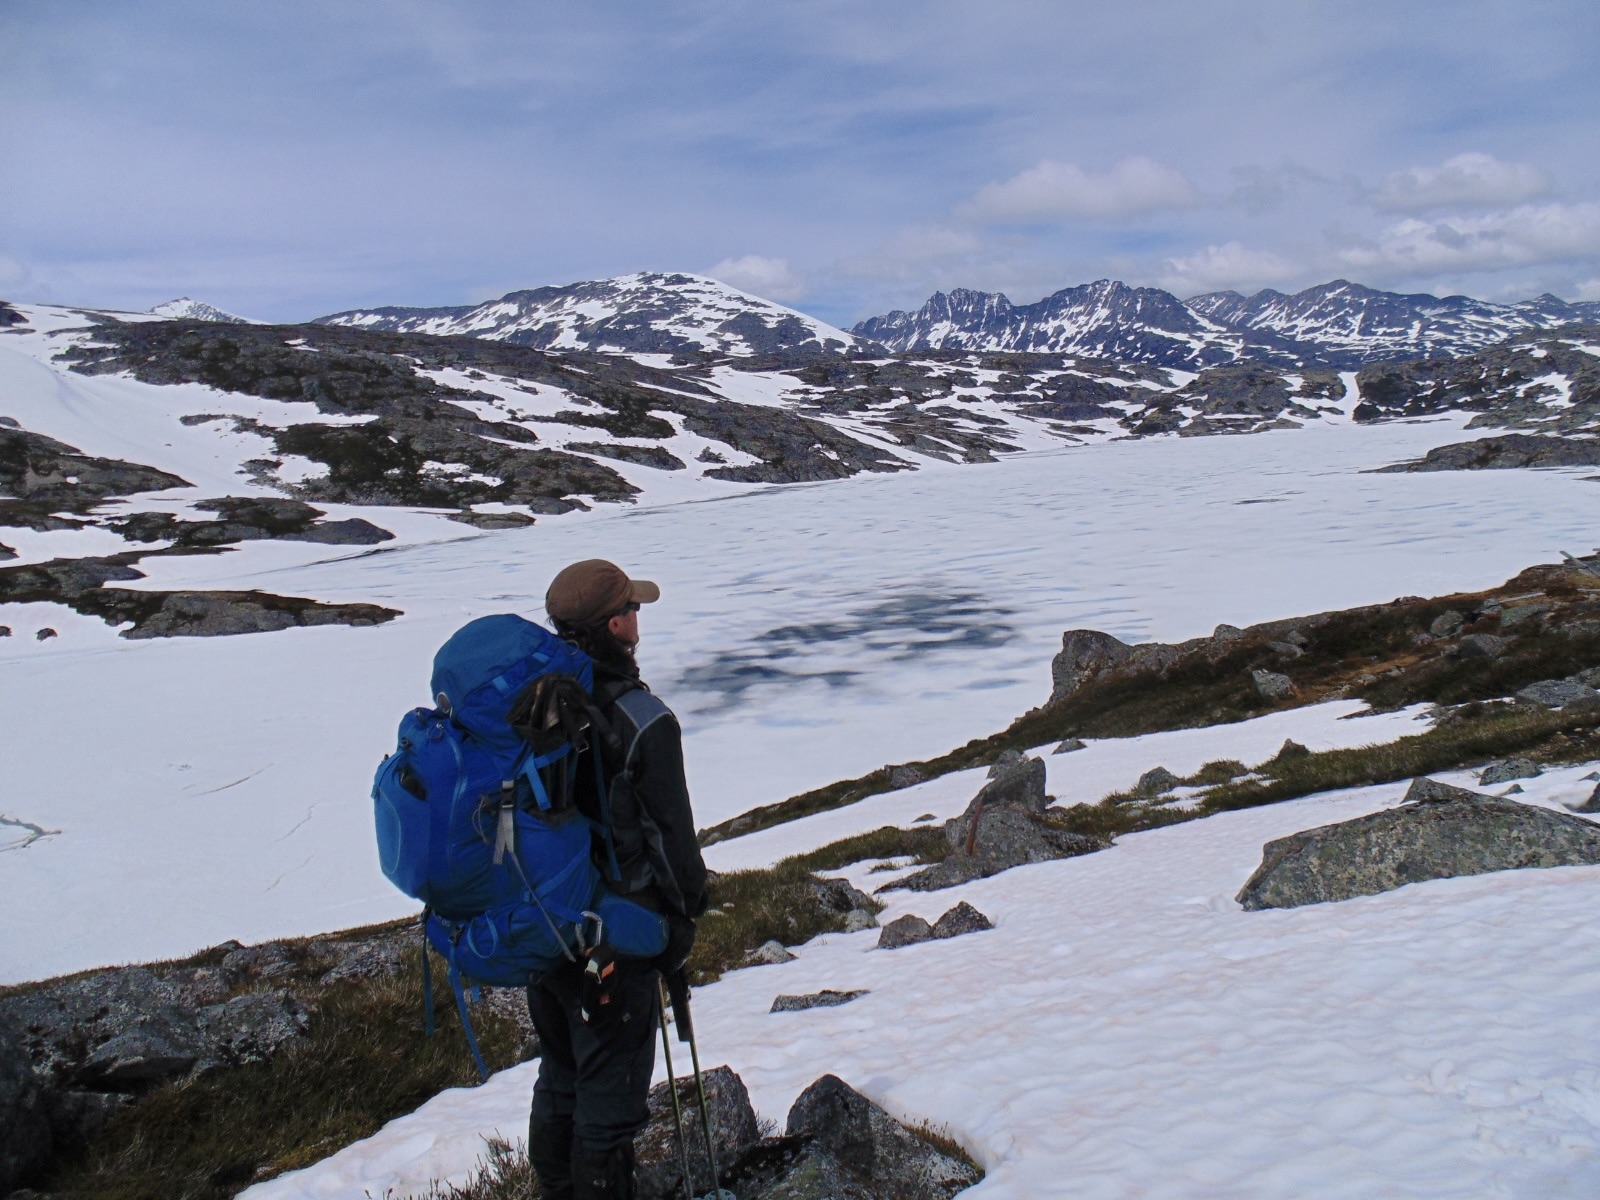 A hiker with a backpack looks out over snow-capped Coast Ranges